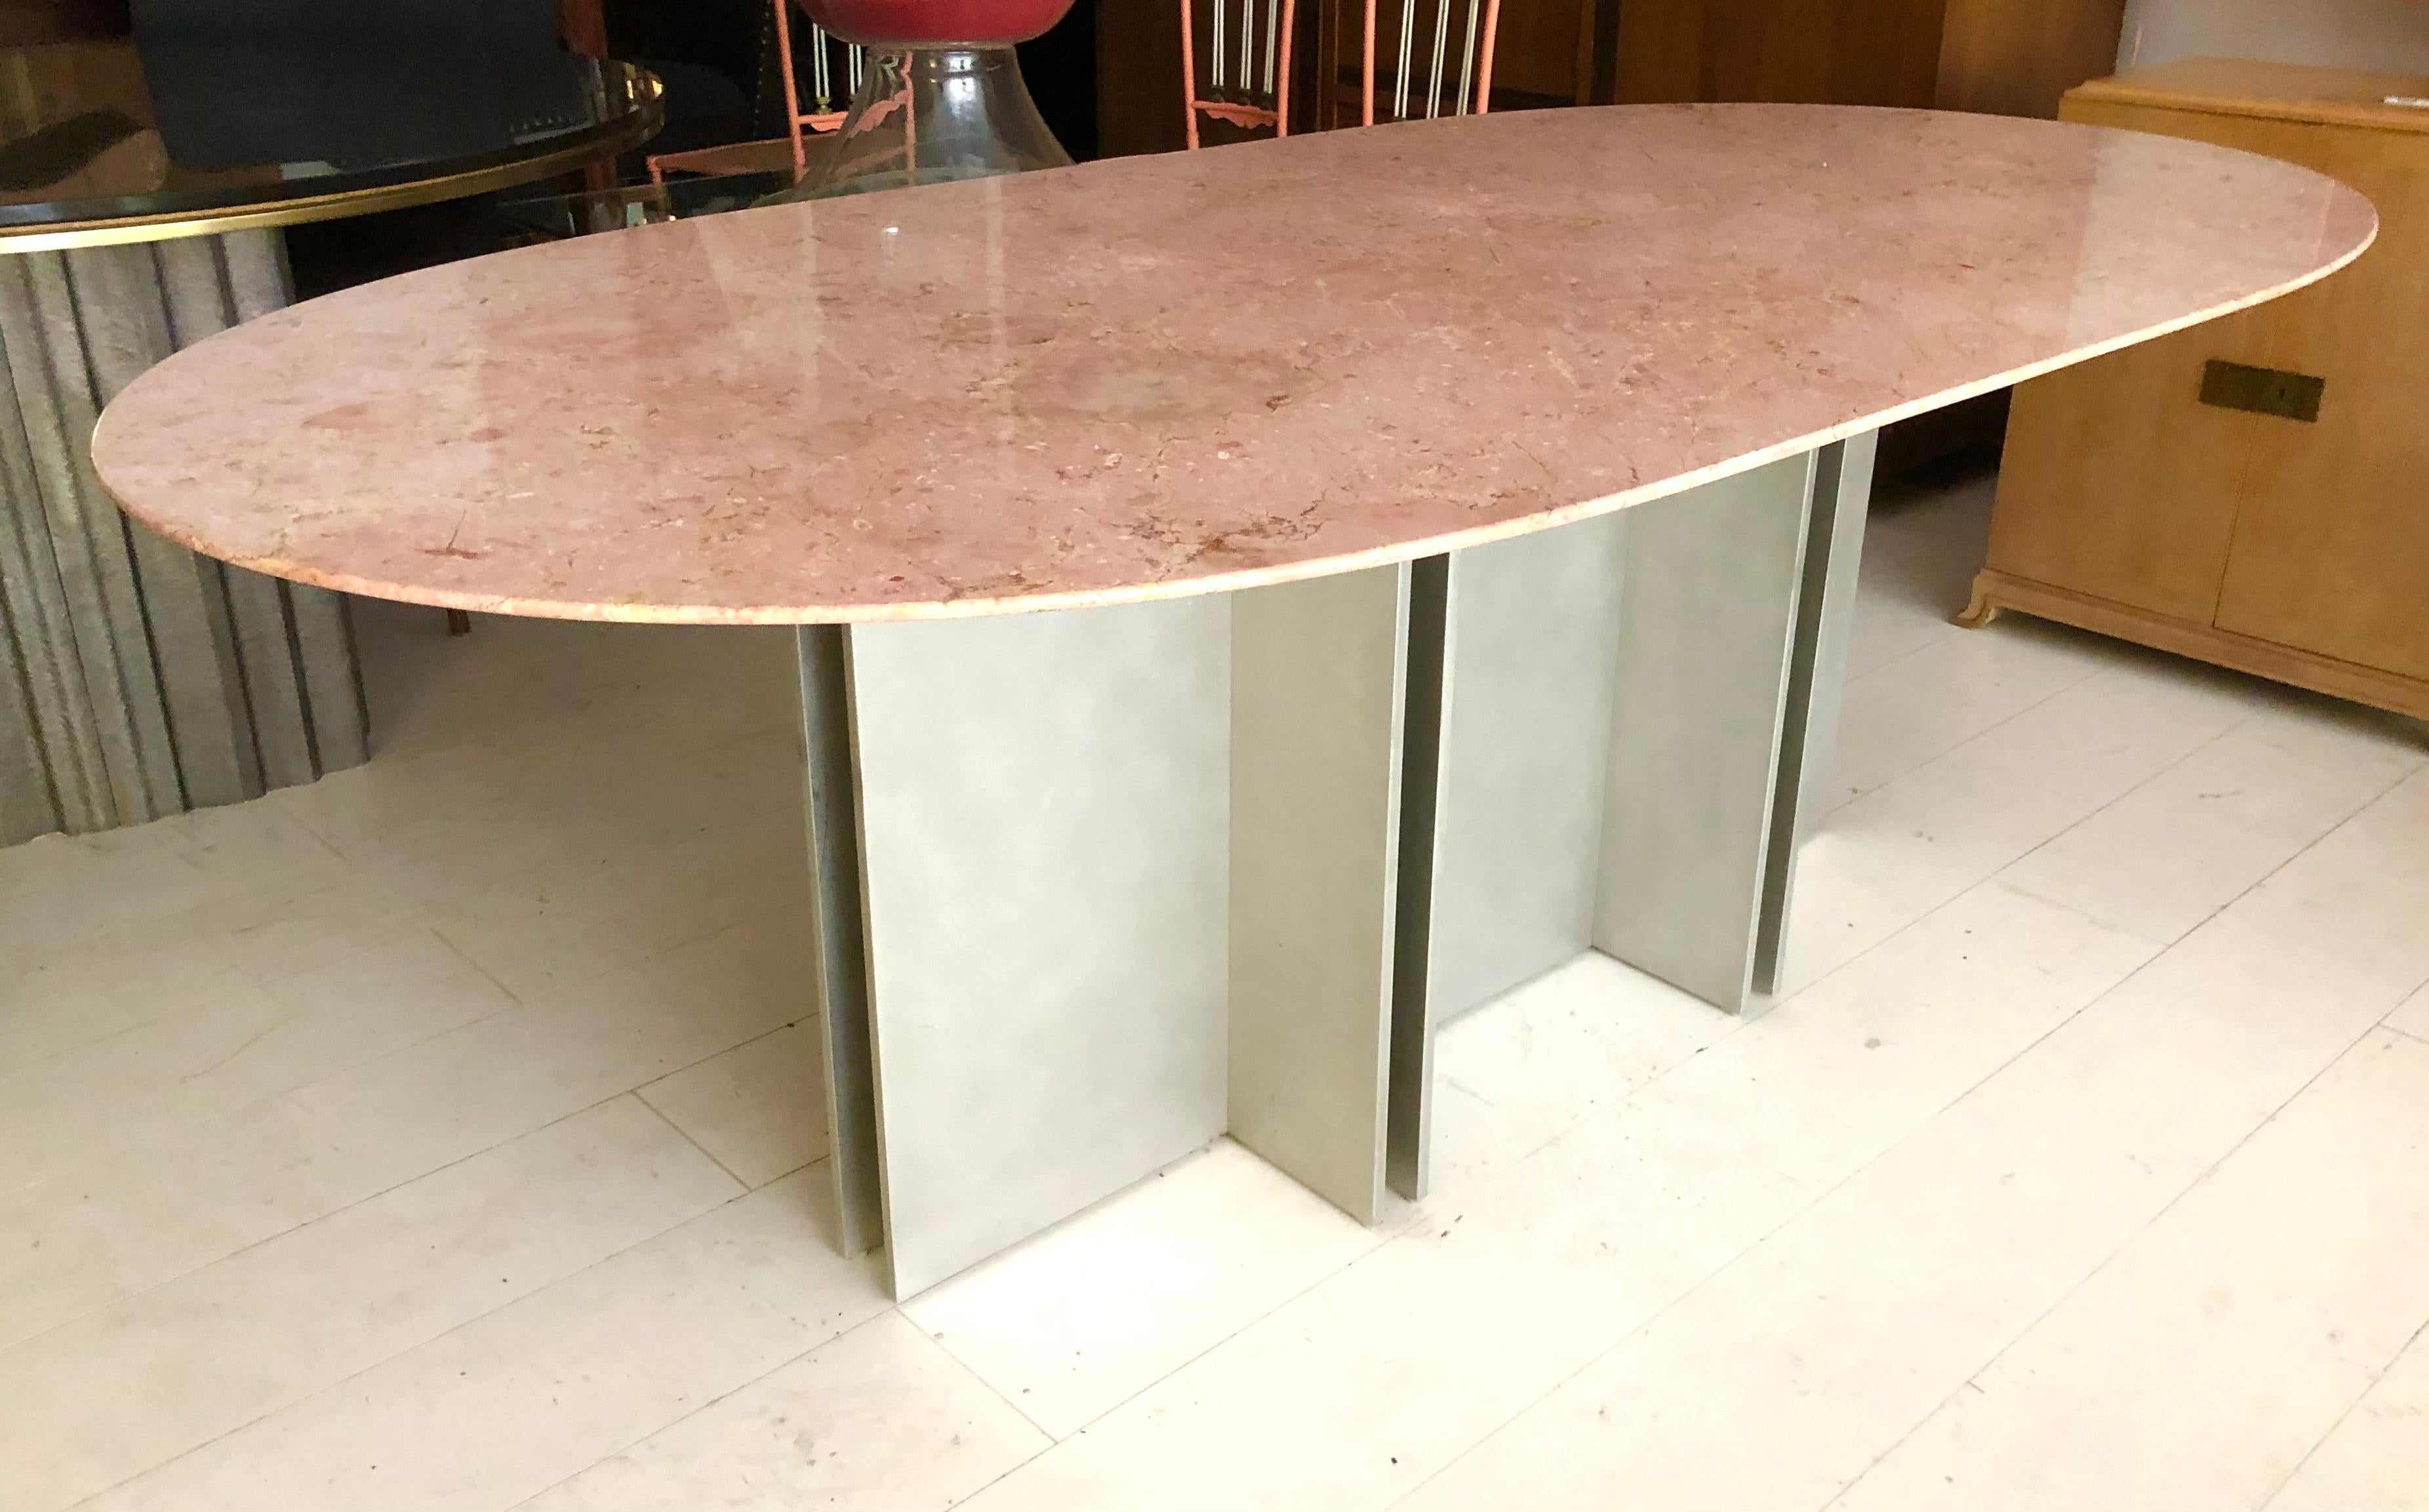 c. 1970s, likely Italian, the architectural, heavy gauge aluminum base supports a thick oval marble top carved with razor edge bevel. Would make an impressive desk. Designer unknown but incredible build quality and design